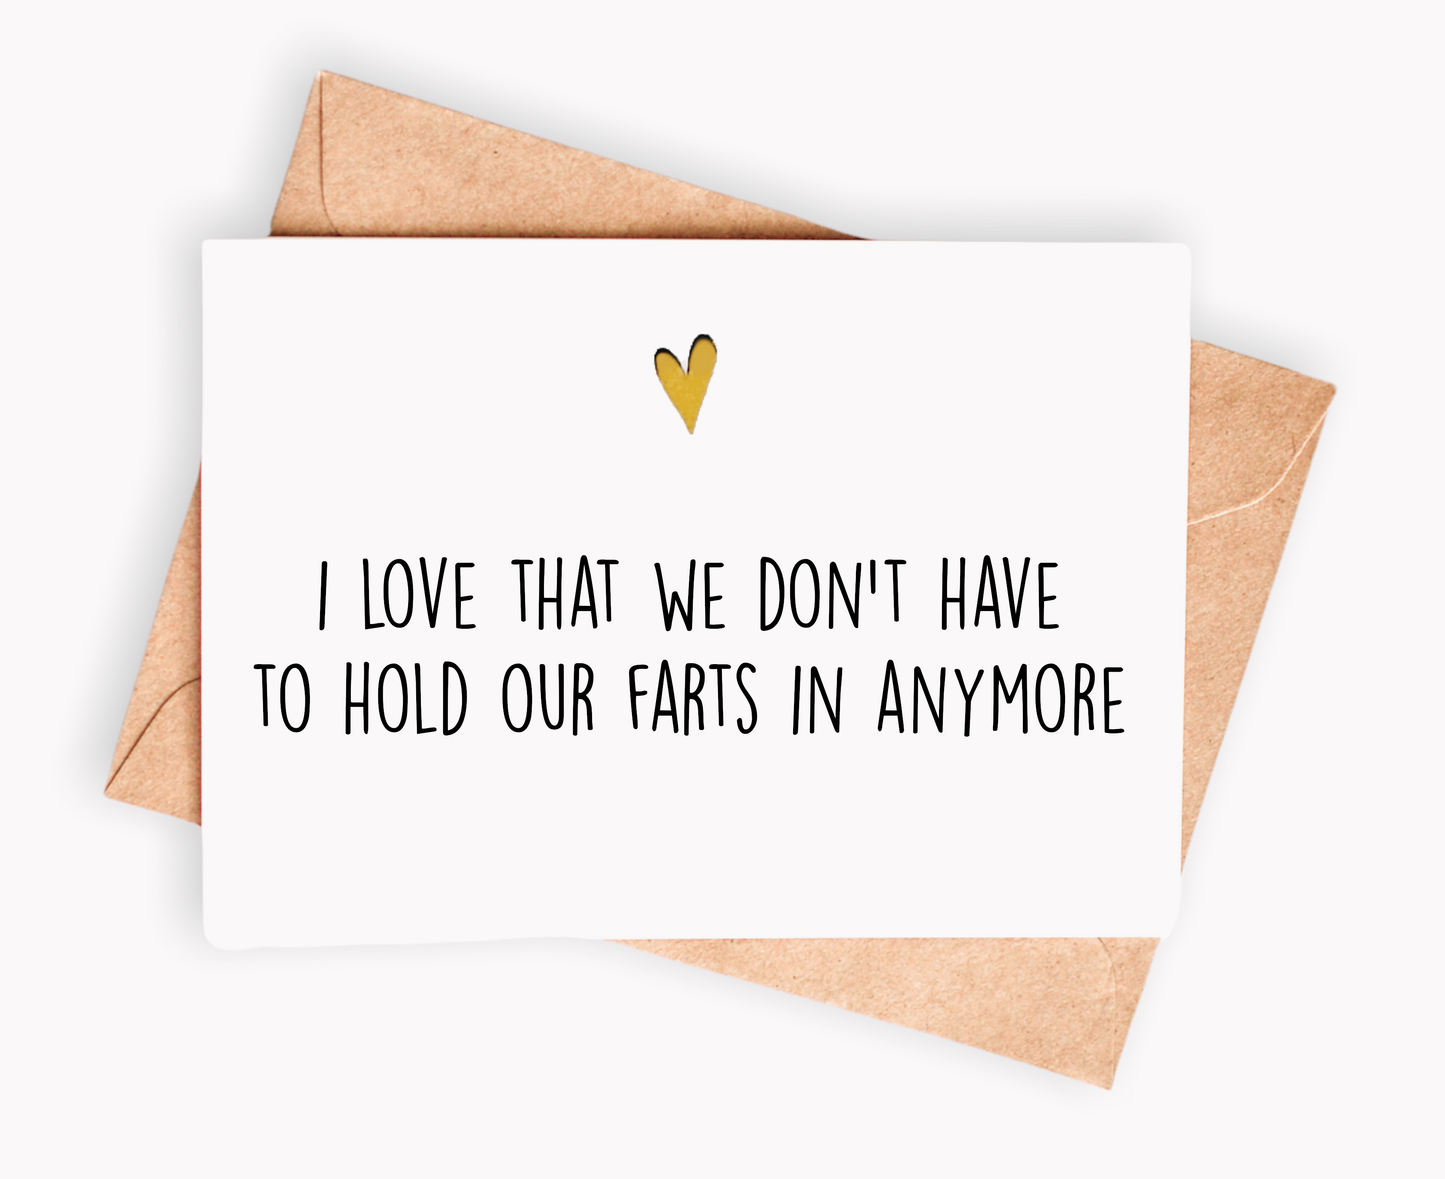 I love we don't have to hold our farts